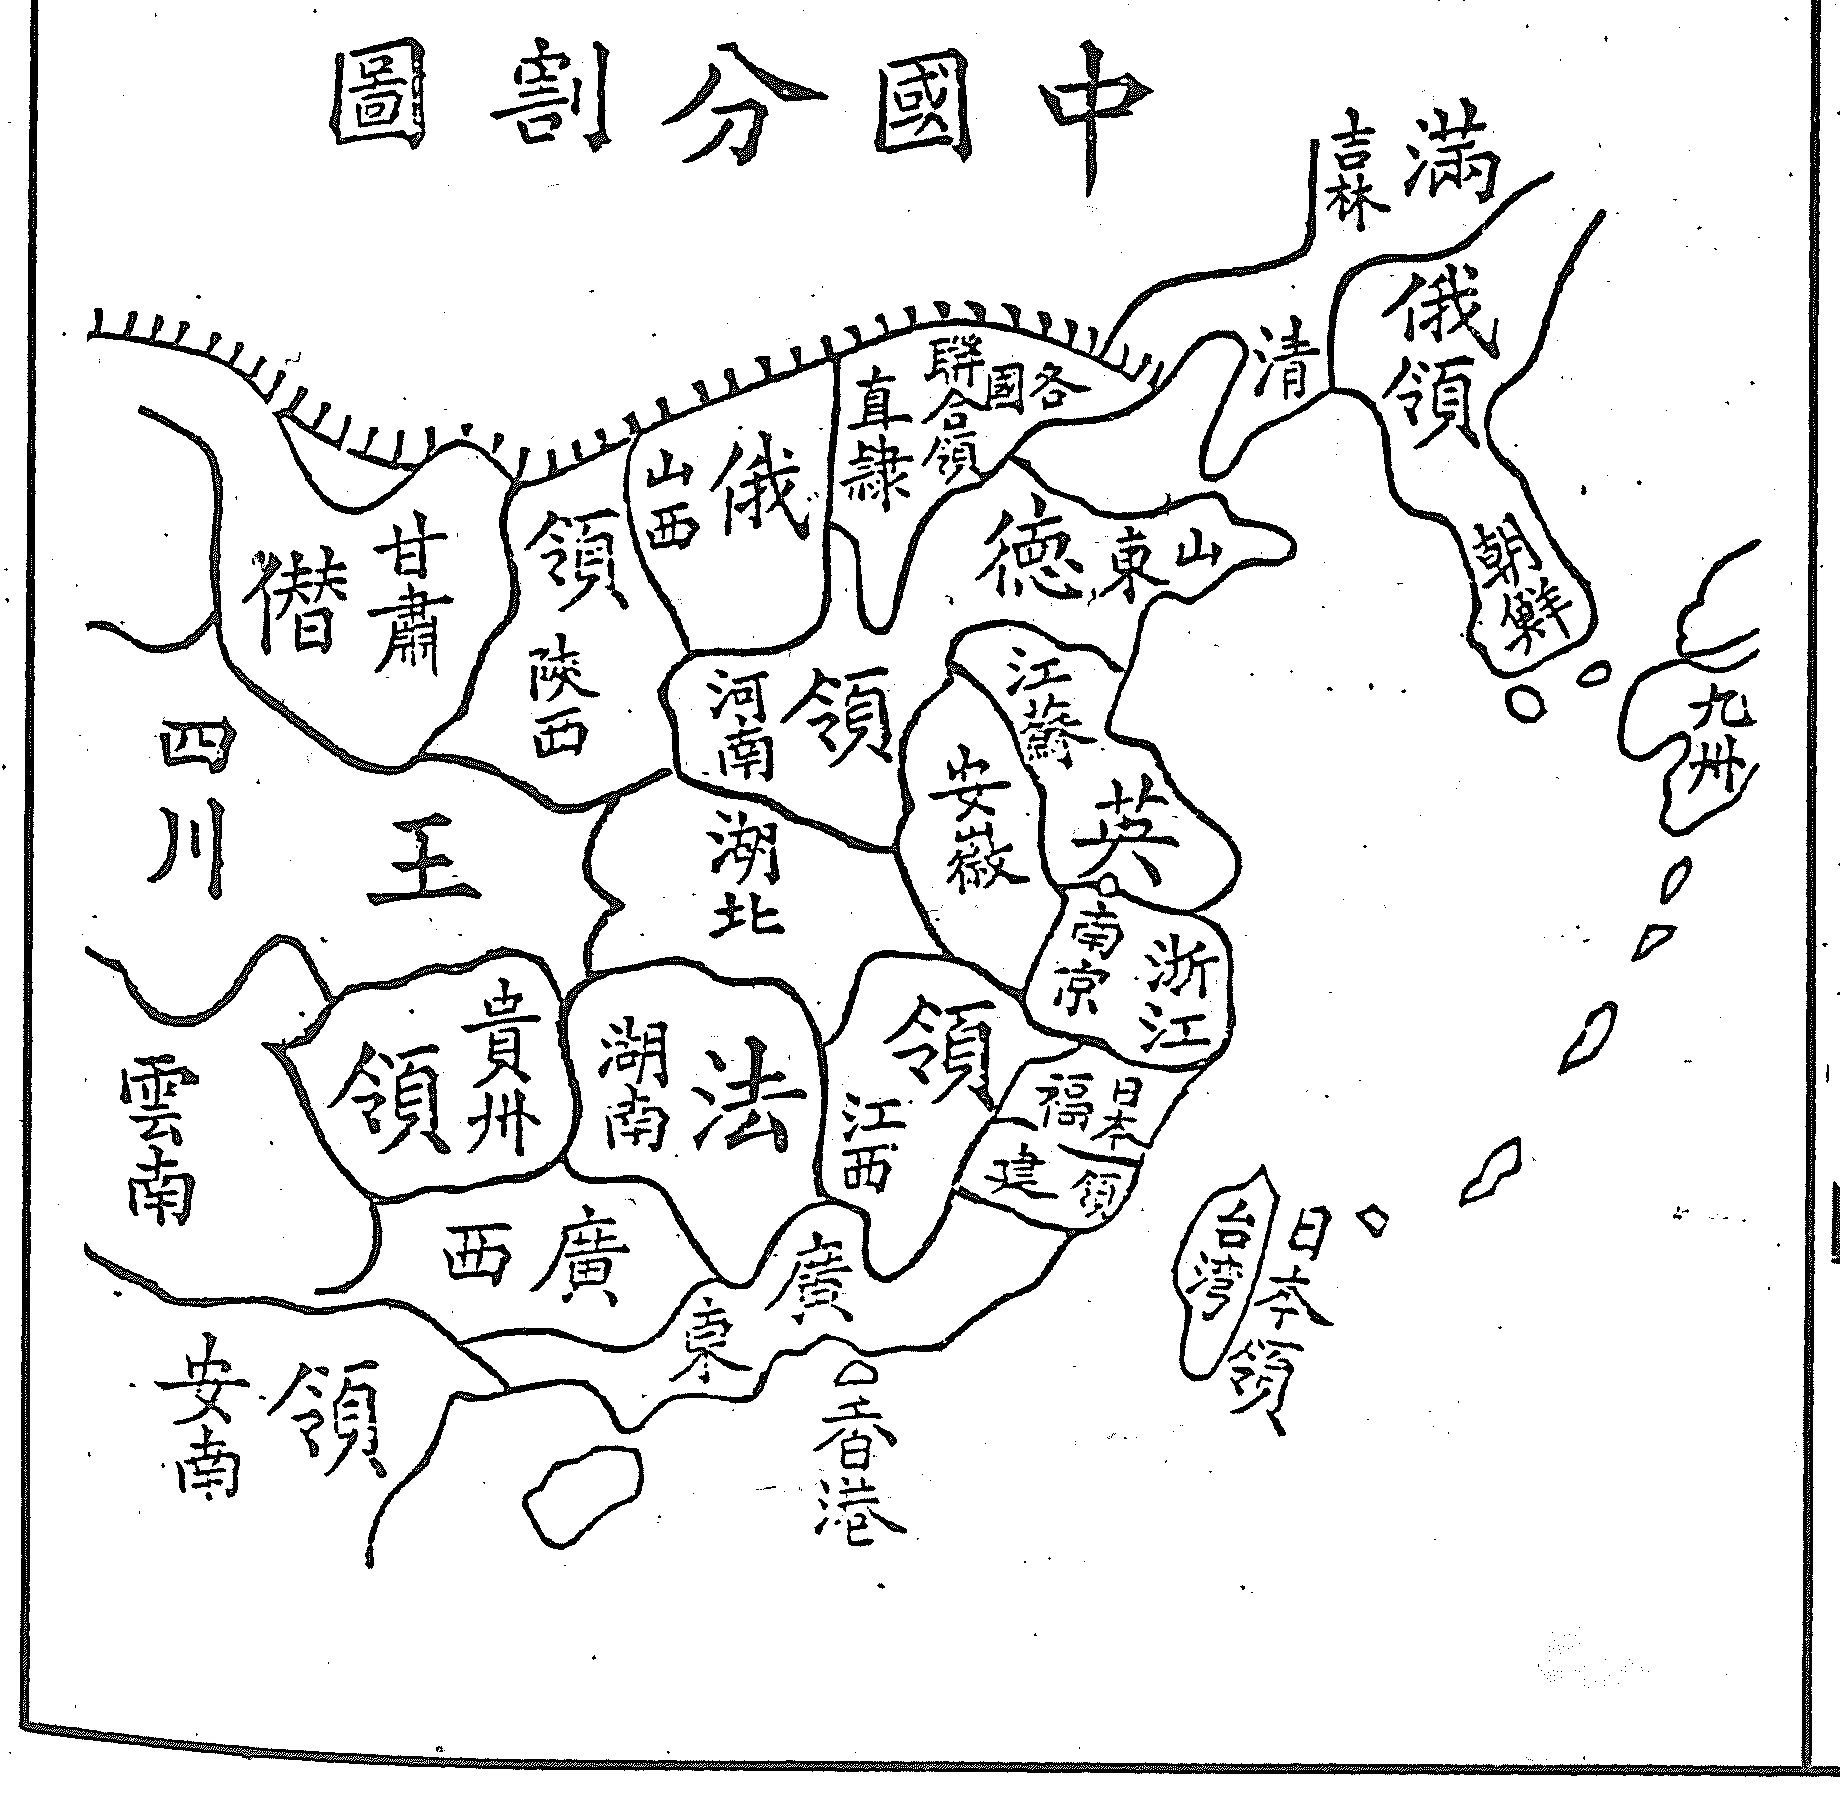 Zhongguo fenge tu 中國分割圖 [Map of the (planned) partition of China]